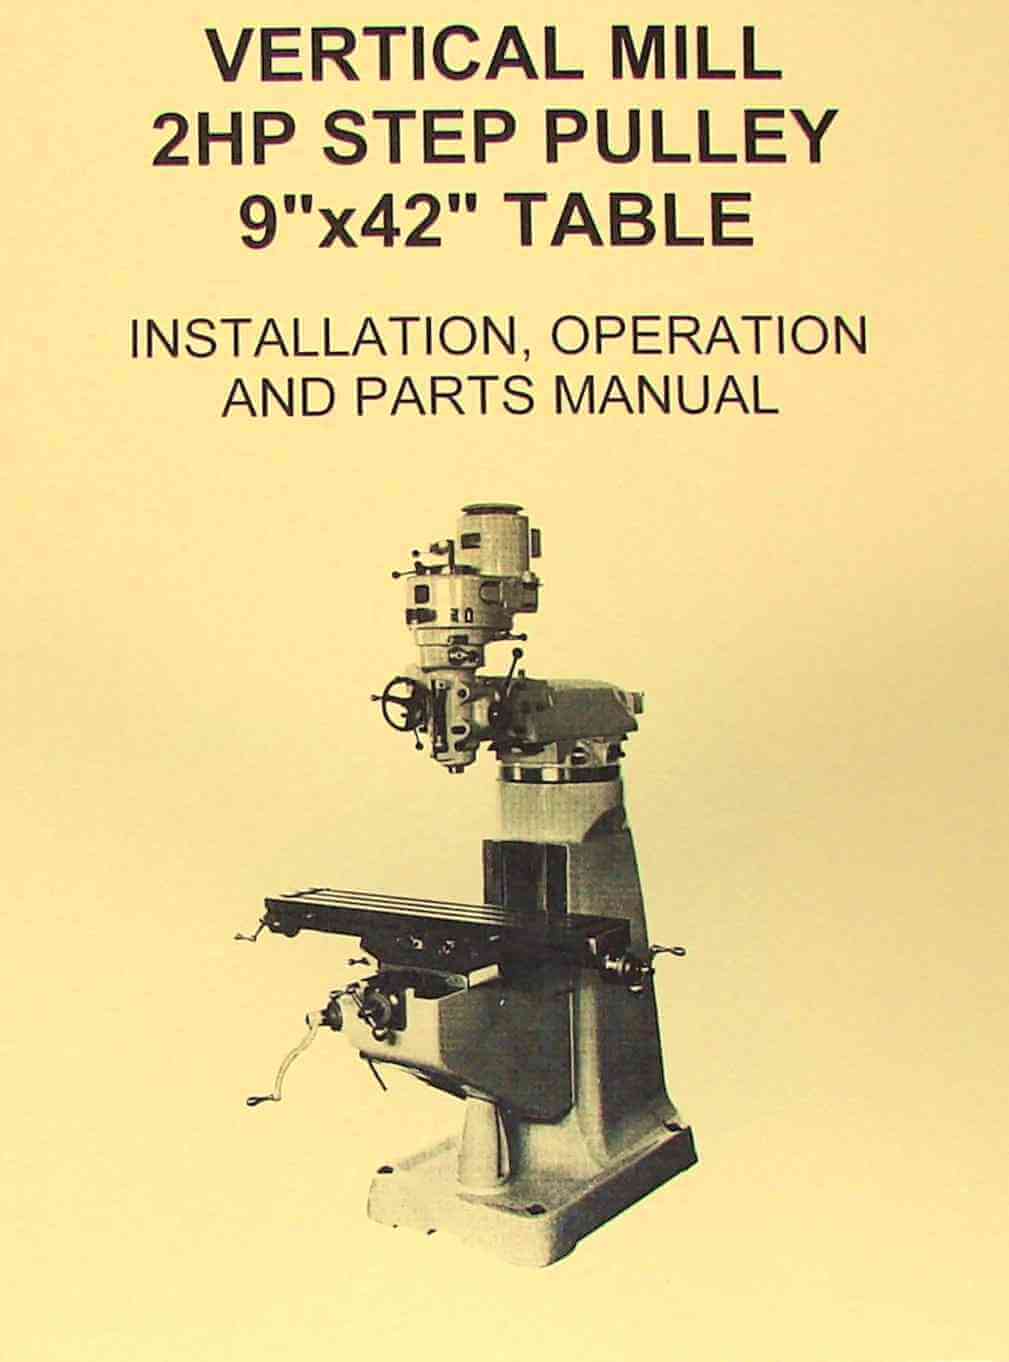 Operations and Parts Manual Enco 1 1/4" Complex Drilling and Milling Machine 